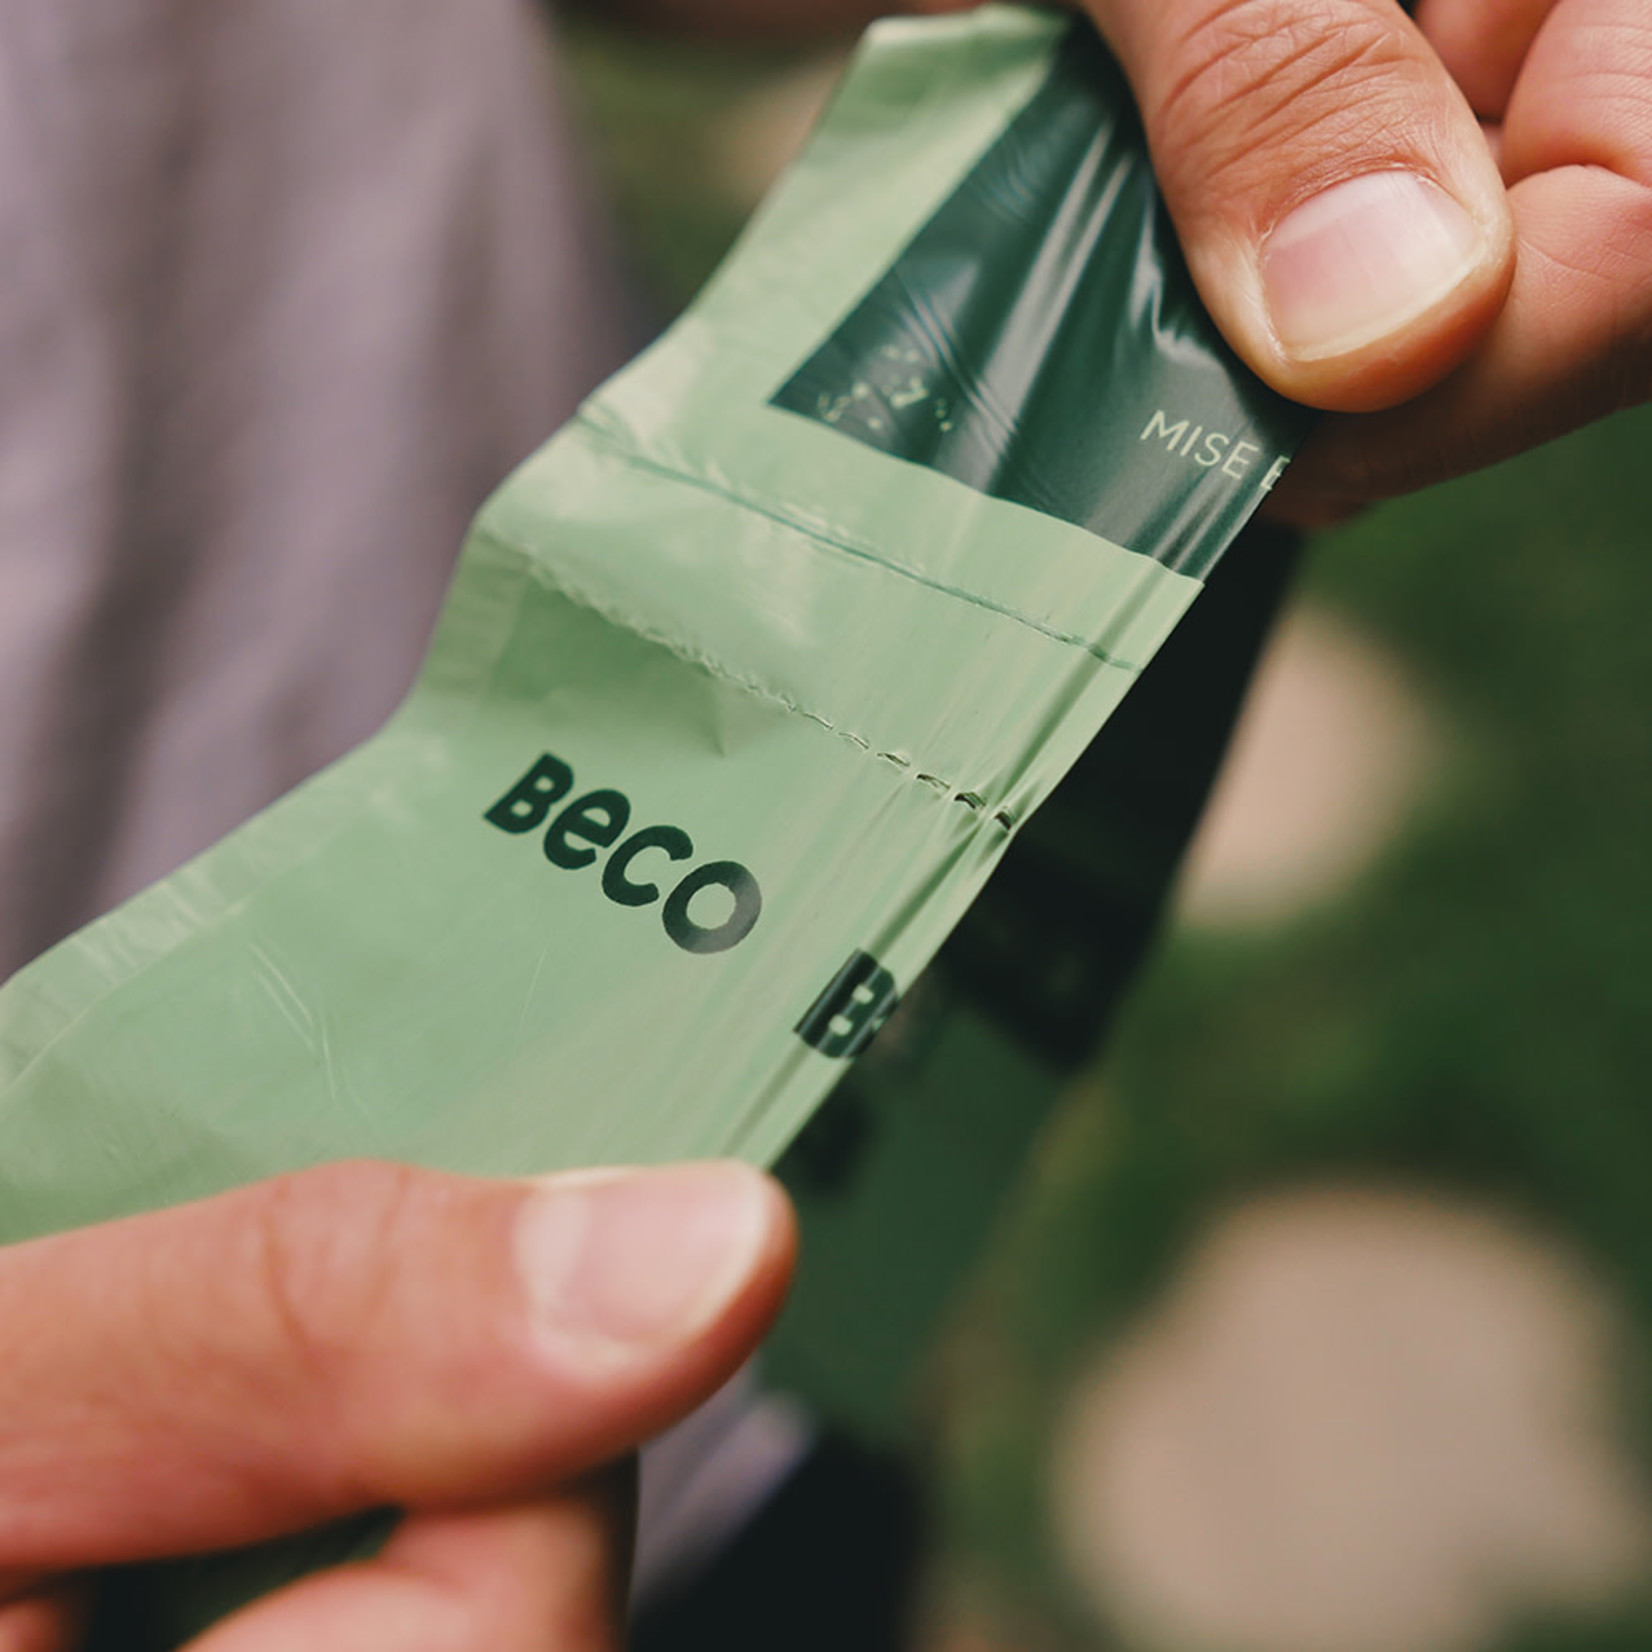 Beco Eco-Friendly Mint Scented Degradable Poop Bags 120 bags